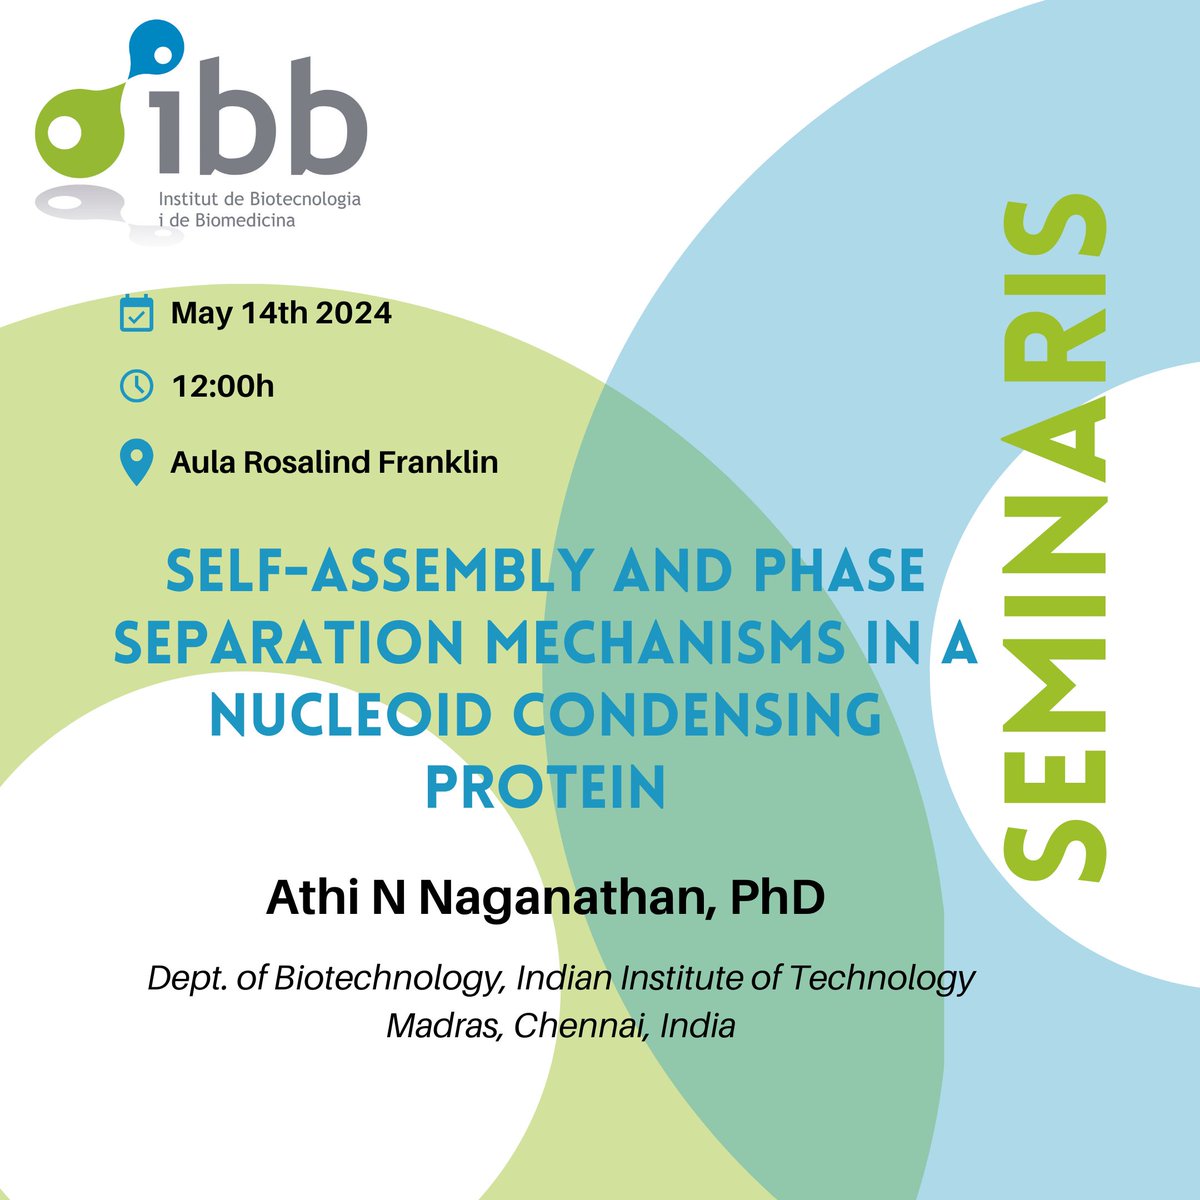 📢 Seminari 'Self-Assembly and Phase Separation Mechanisms in a Nucleoid Condensing Protein' - Dr. Athi N Naganathan, professor i IP del Indian Institute of Technology Madras. 🗓️14 de maig 2024 ⌚️12pm 📍Aula Rosalind Franklin - IBB Us hi esperem! @PPMC_UAB #IBBSeminar